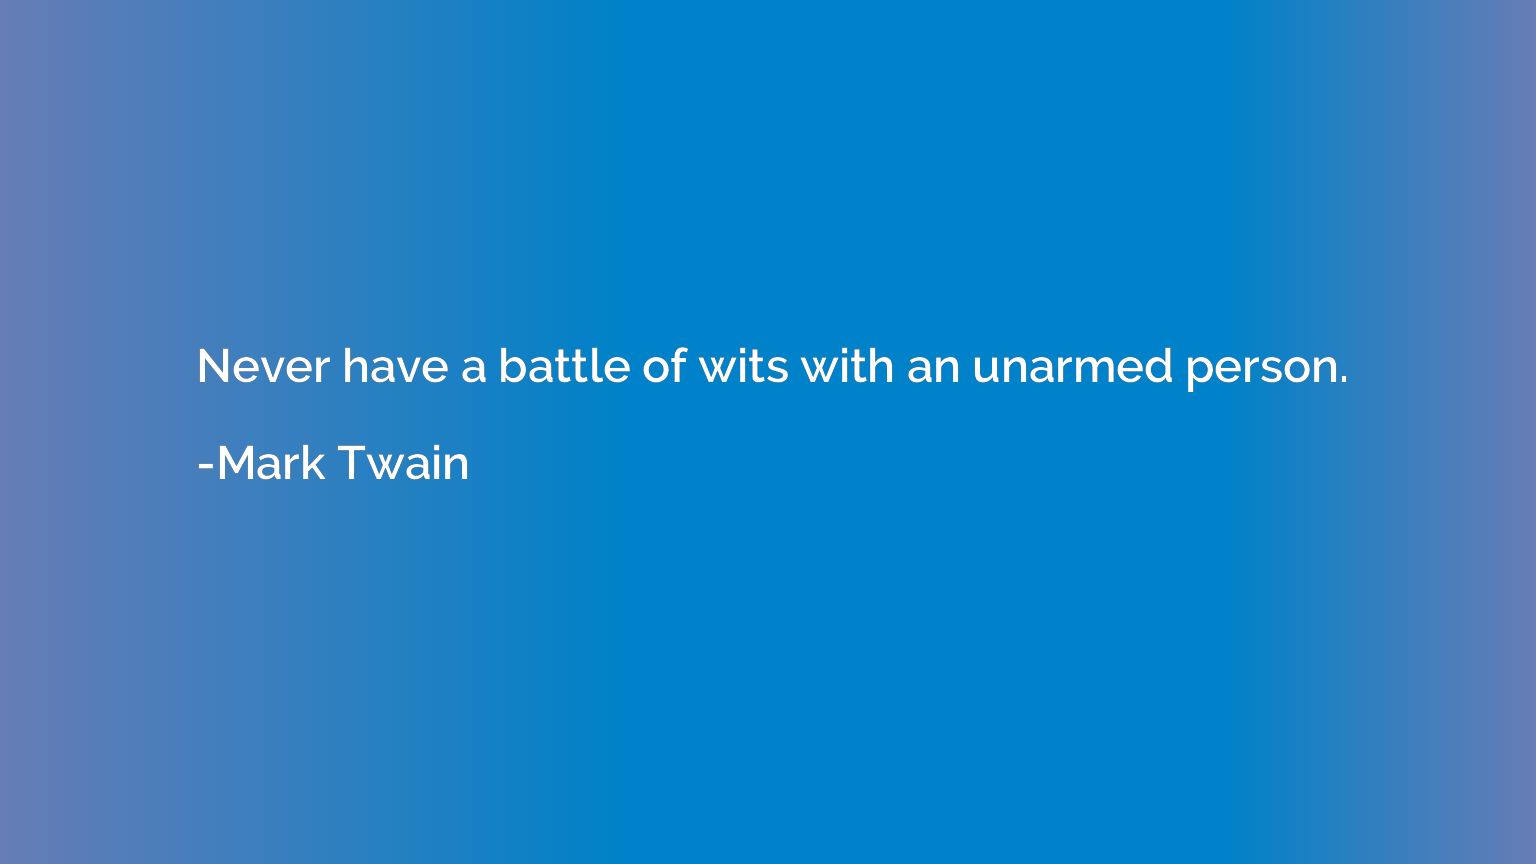 Never have a battle of wits with an unarmed person.